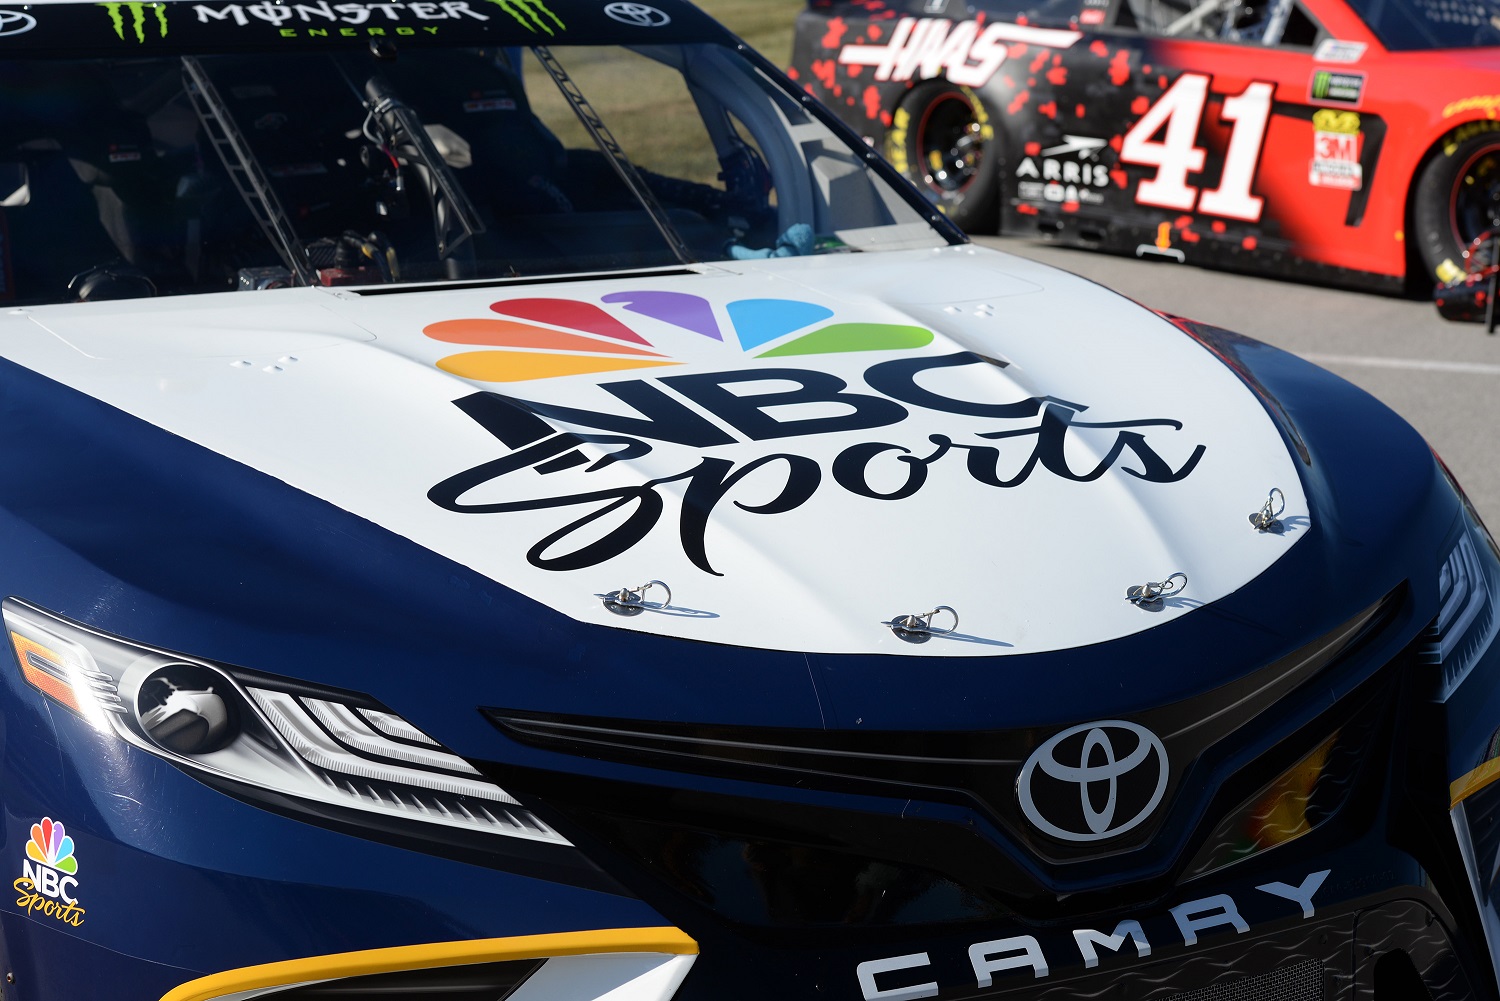 The NBC Sports car sits on pit lane before the start of the Monster Energy NASCAR Cup Series Quaker State 400 on July 13, 2019, at Kentucky Speedway.